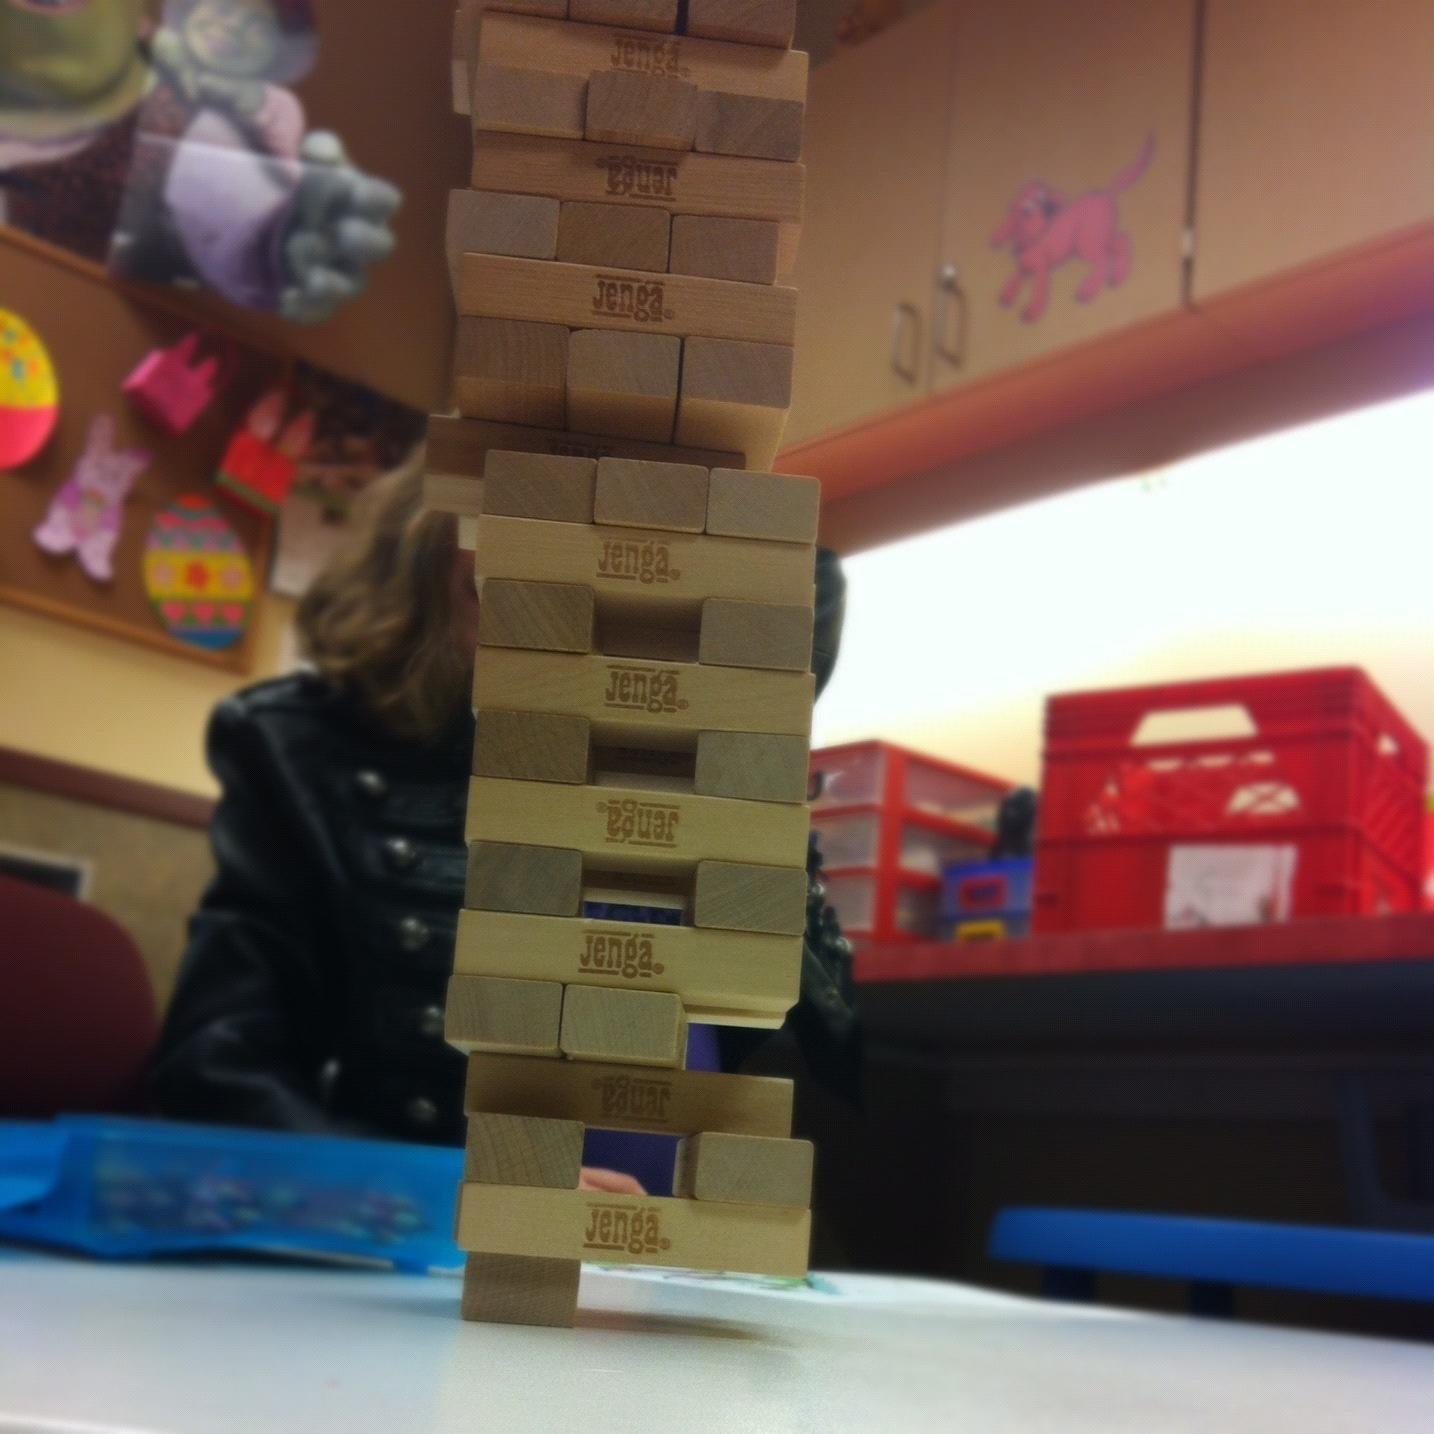 The one Jenga move that's supposed to bring the whole tower down. 